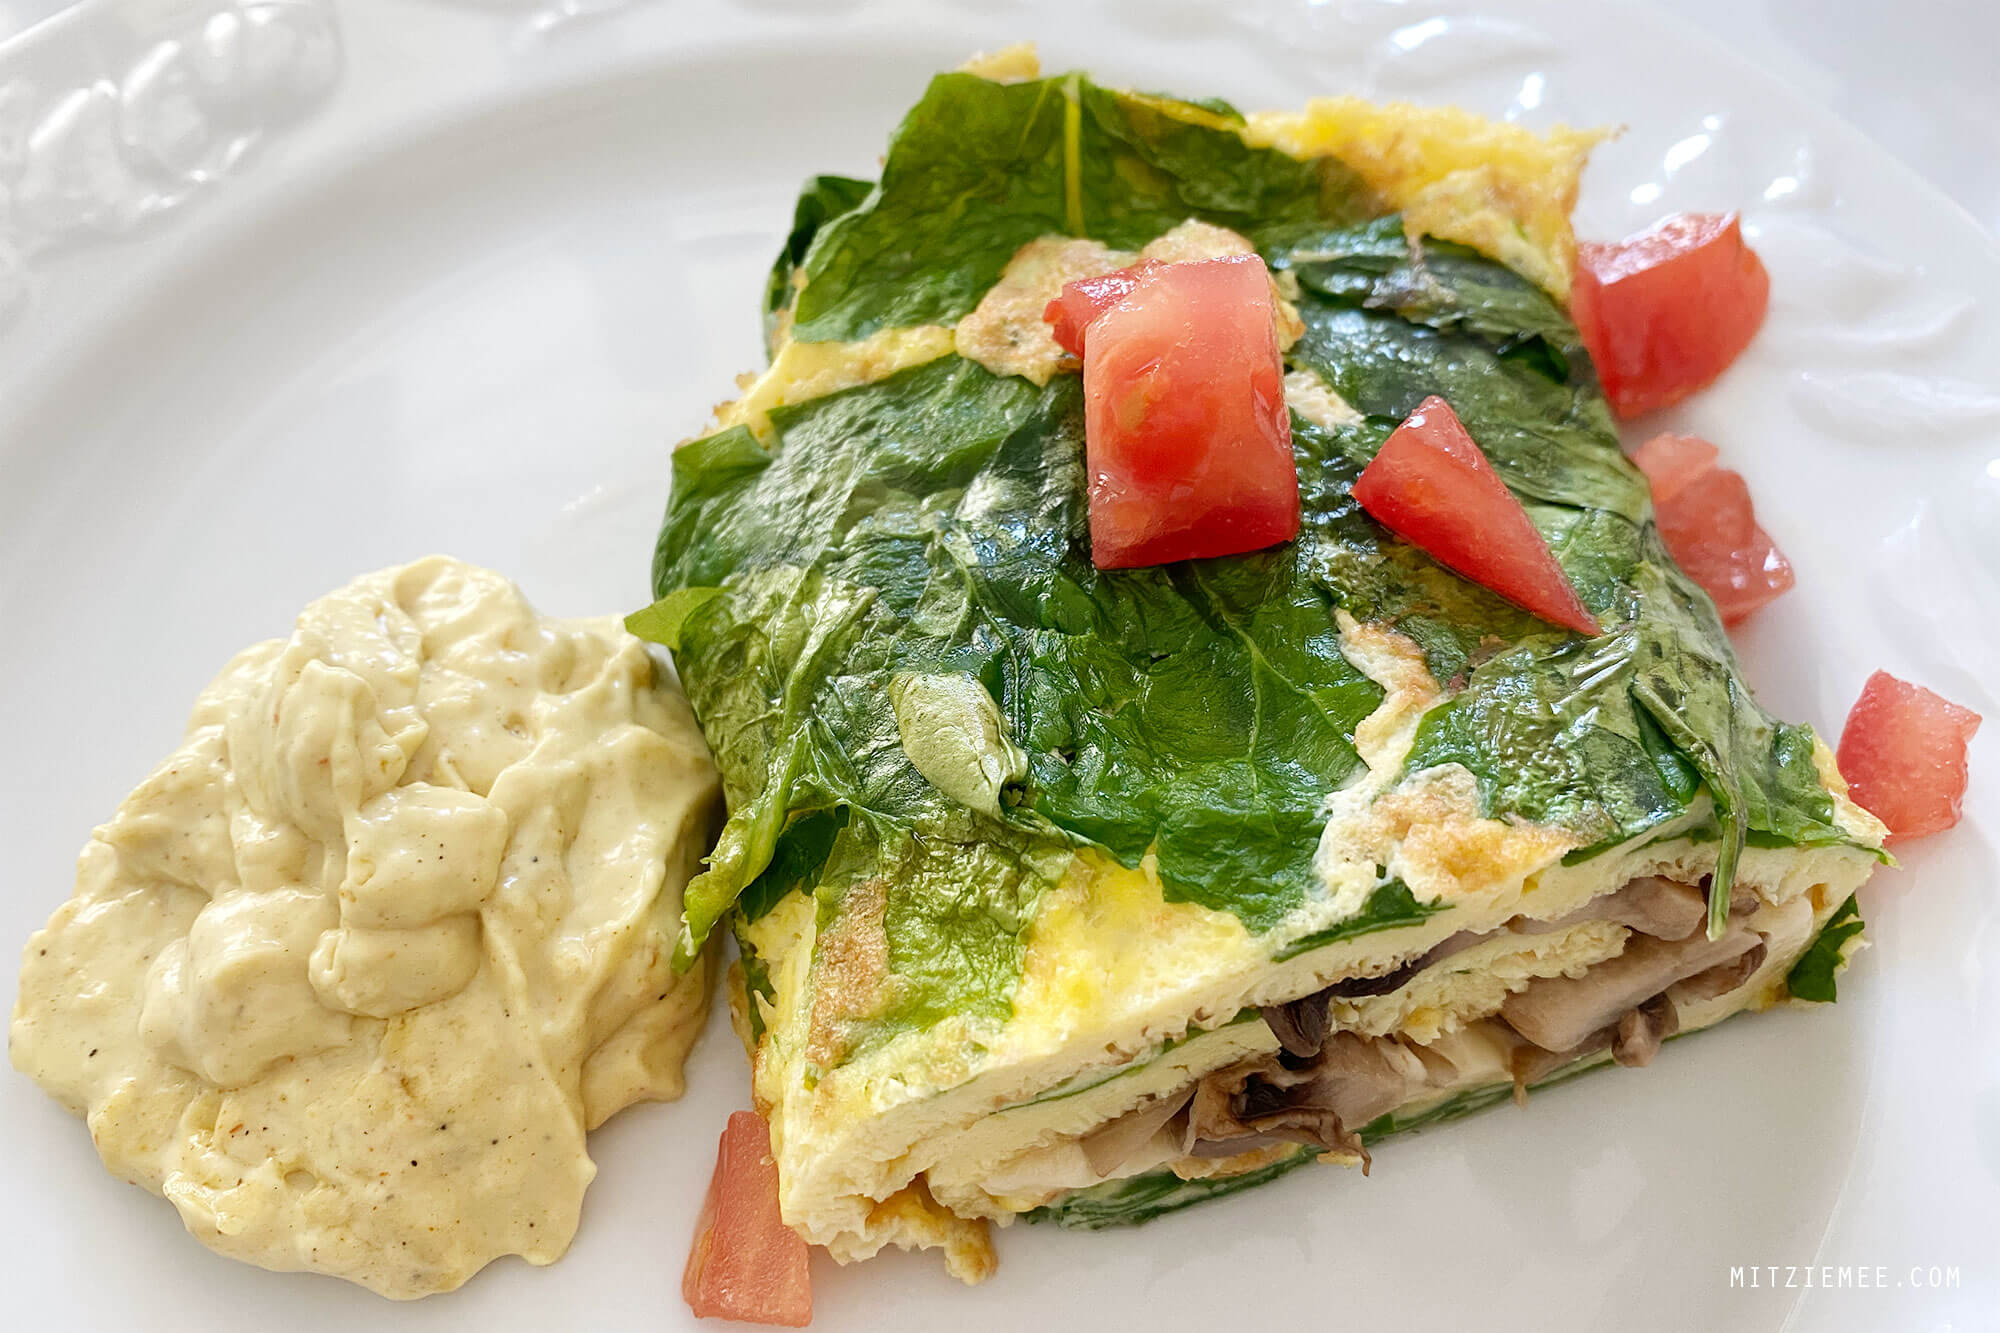 Spinach mushroom and tomato omelette, IHOP Dubai home delivery